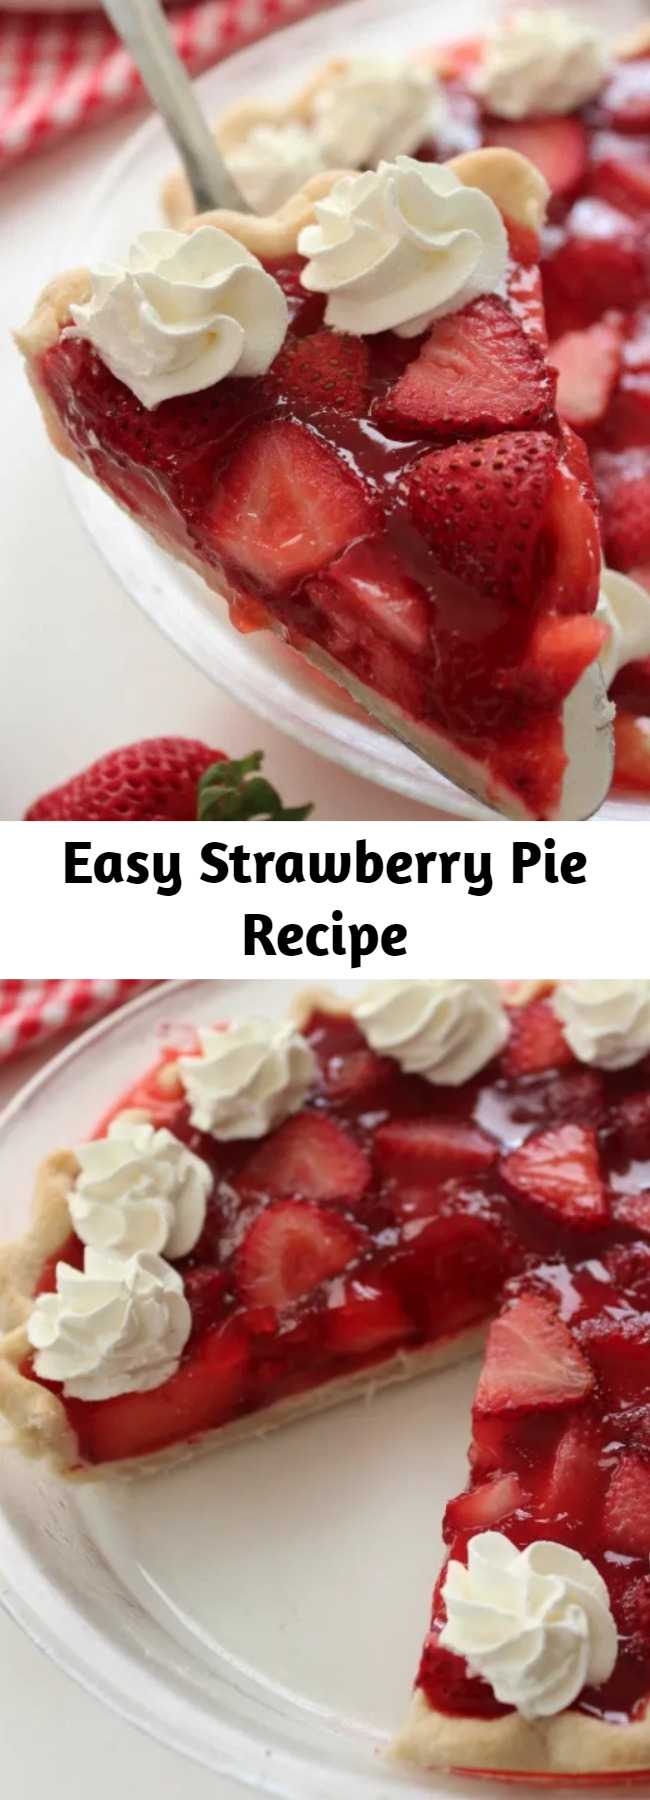 Easy Strawberry Pie Recipe - This super simple Strawberry Pie Recipe is loaded with strawberries and a homemade jelly filling. You will find it to be like the same you find at Frisch’s or Shoney’s. Oh so YUMMY! Since this pie starts with a store bought crust, you can whip it up in no time at all.